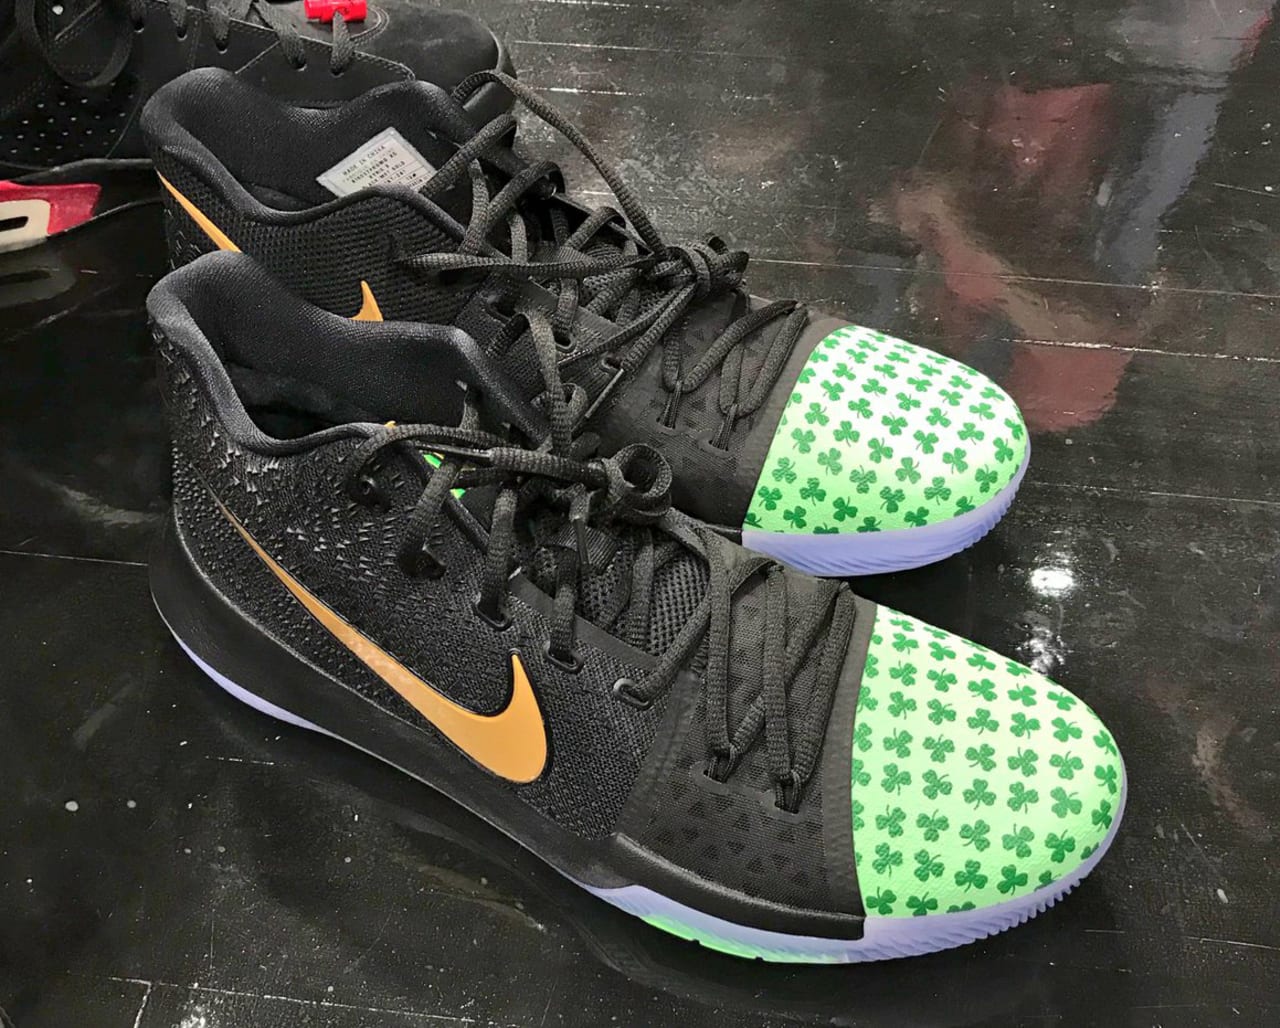 kyrie irving 3 shoes